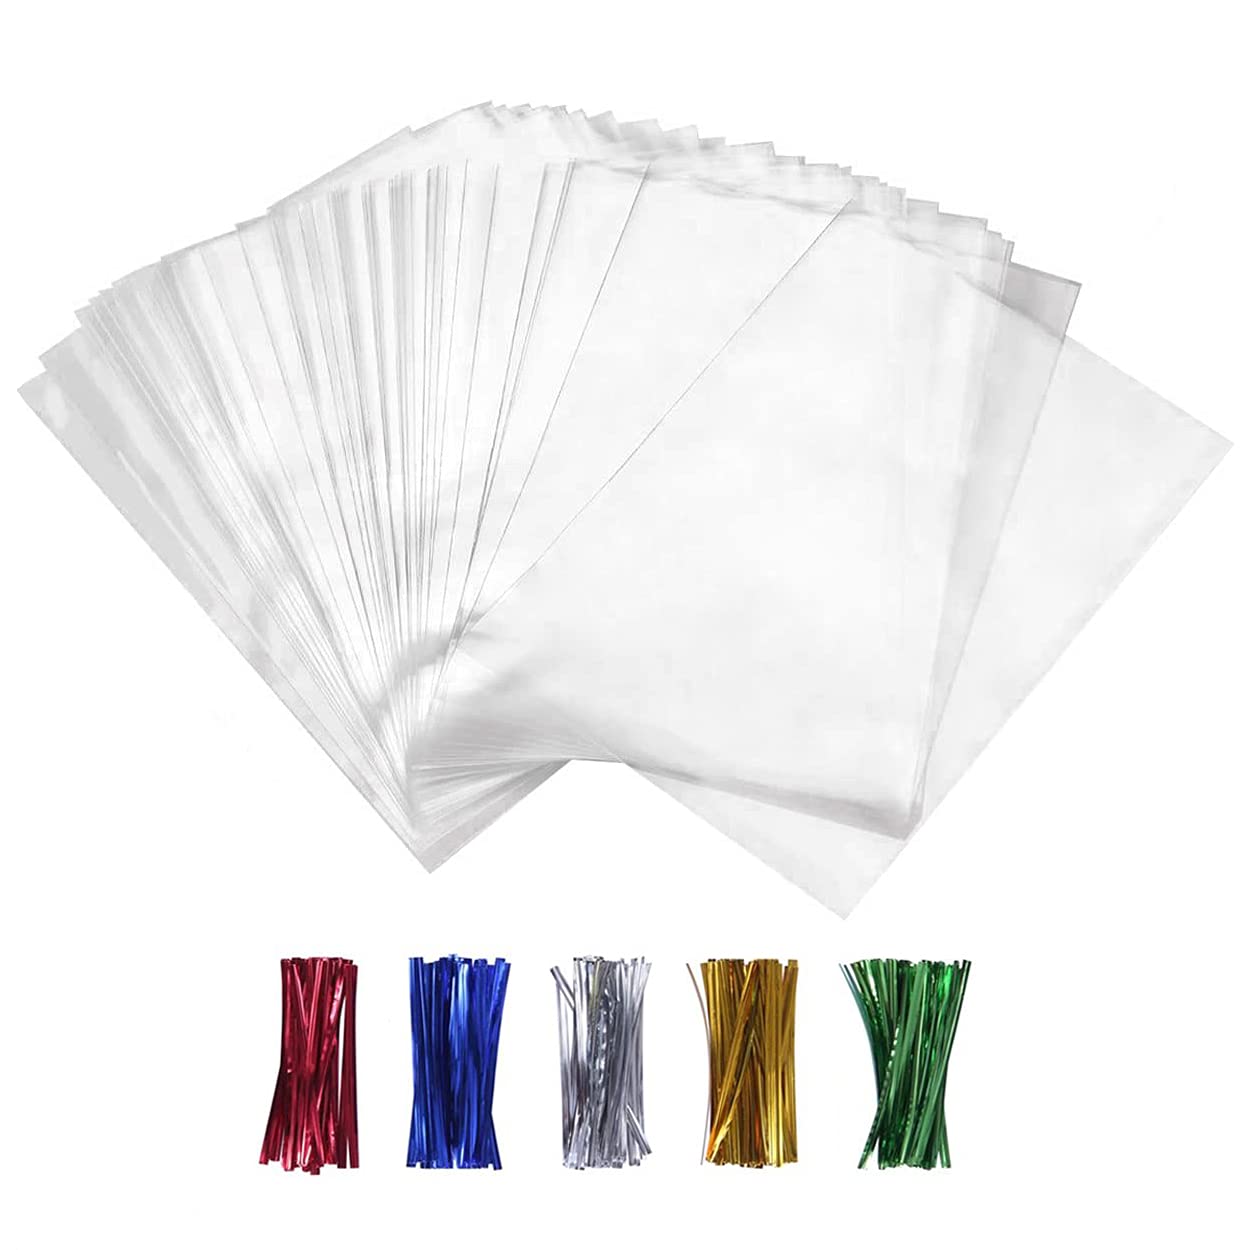 XLSFPY 100PCS Cellophane Bags Clear Plastic Cello Bags 4x6 with 4